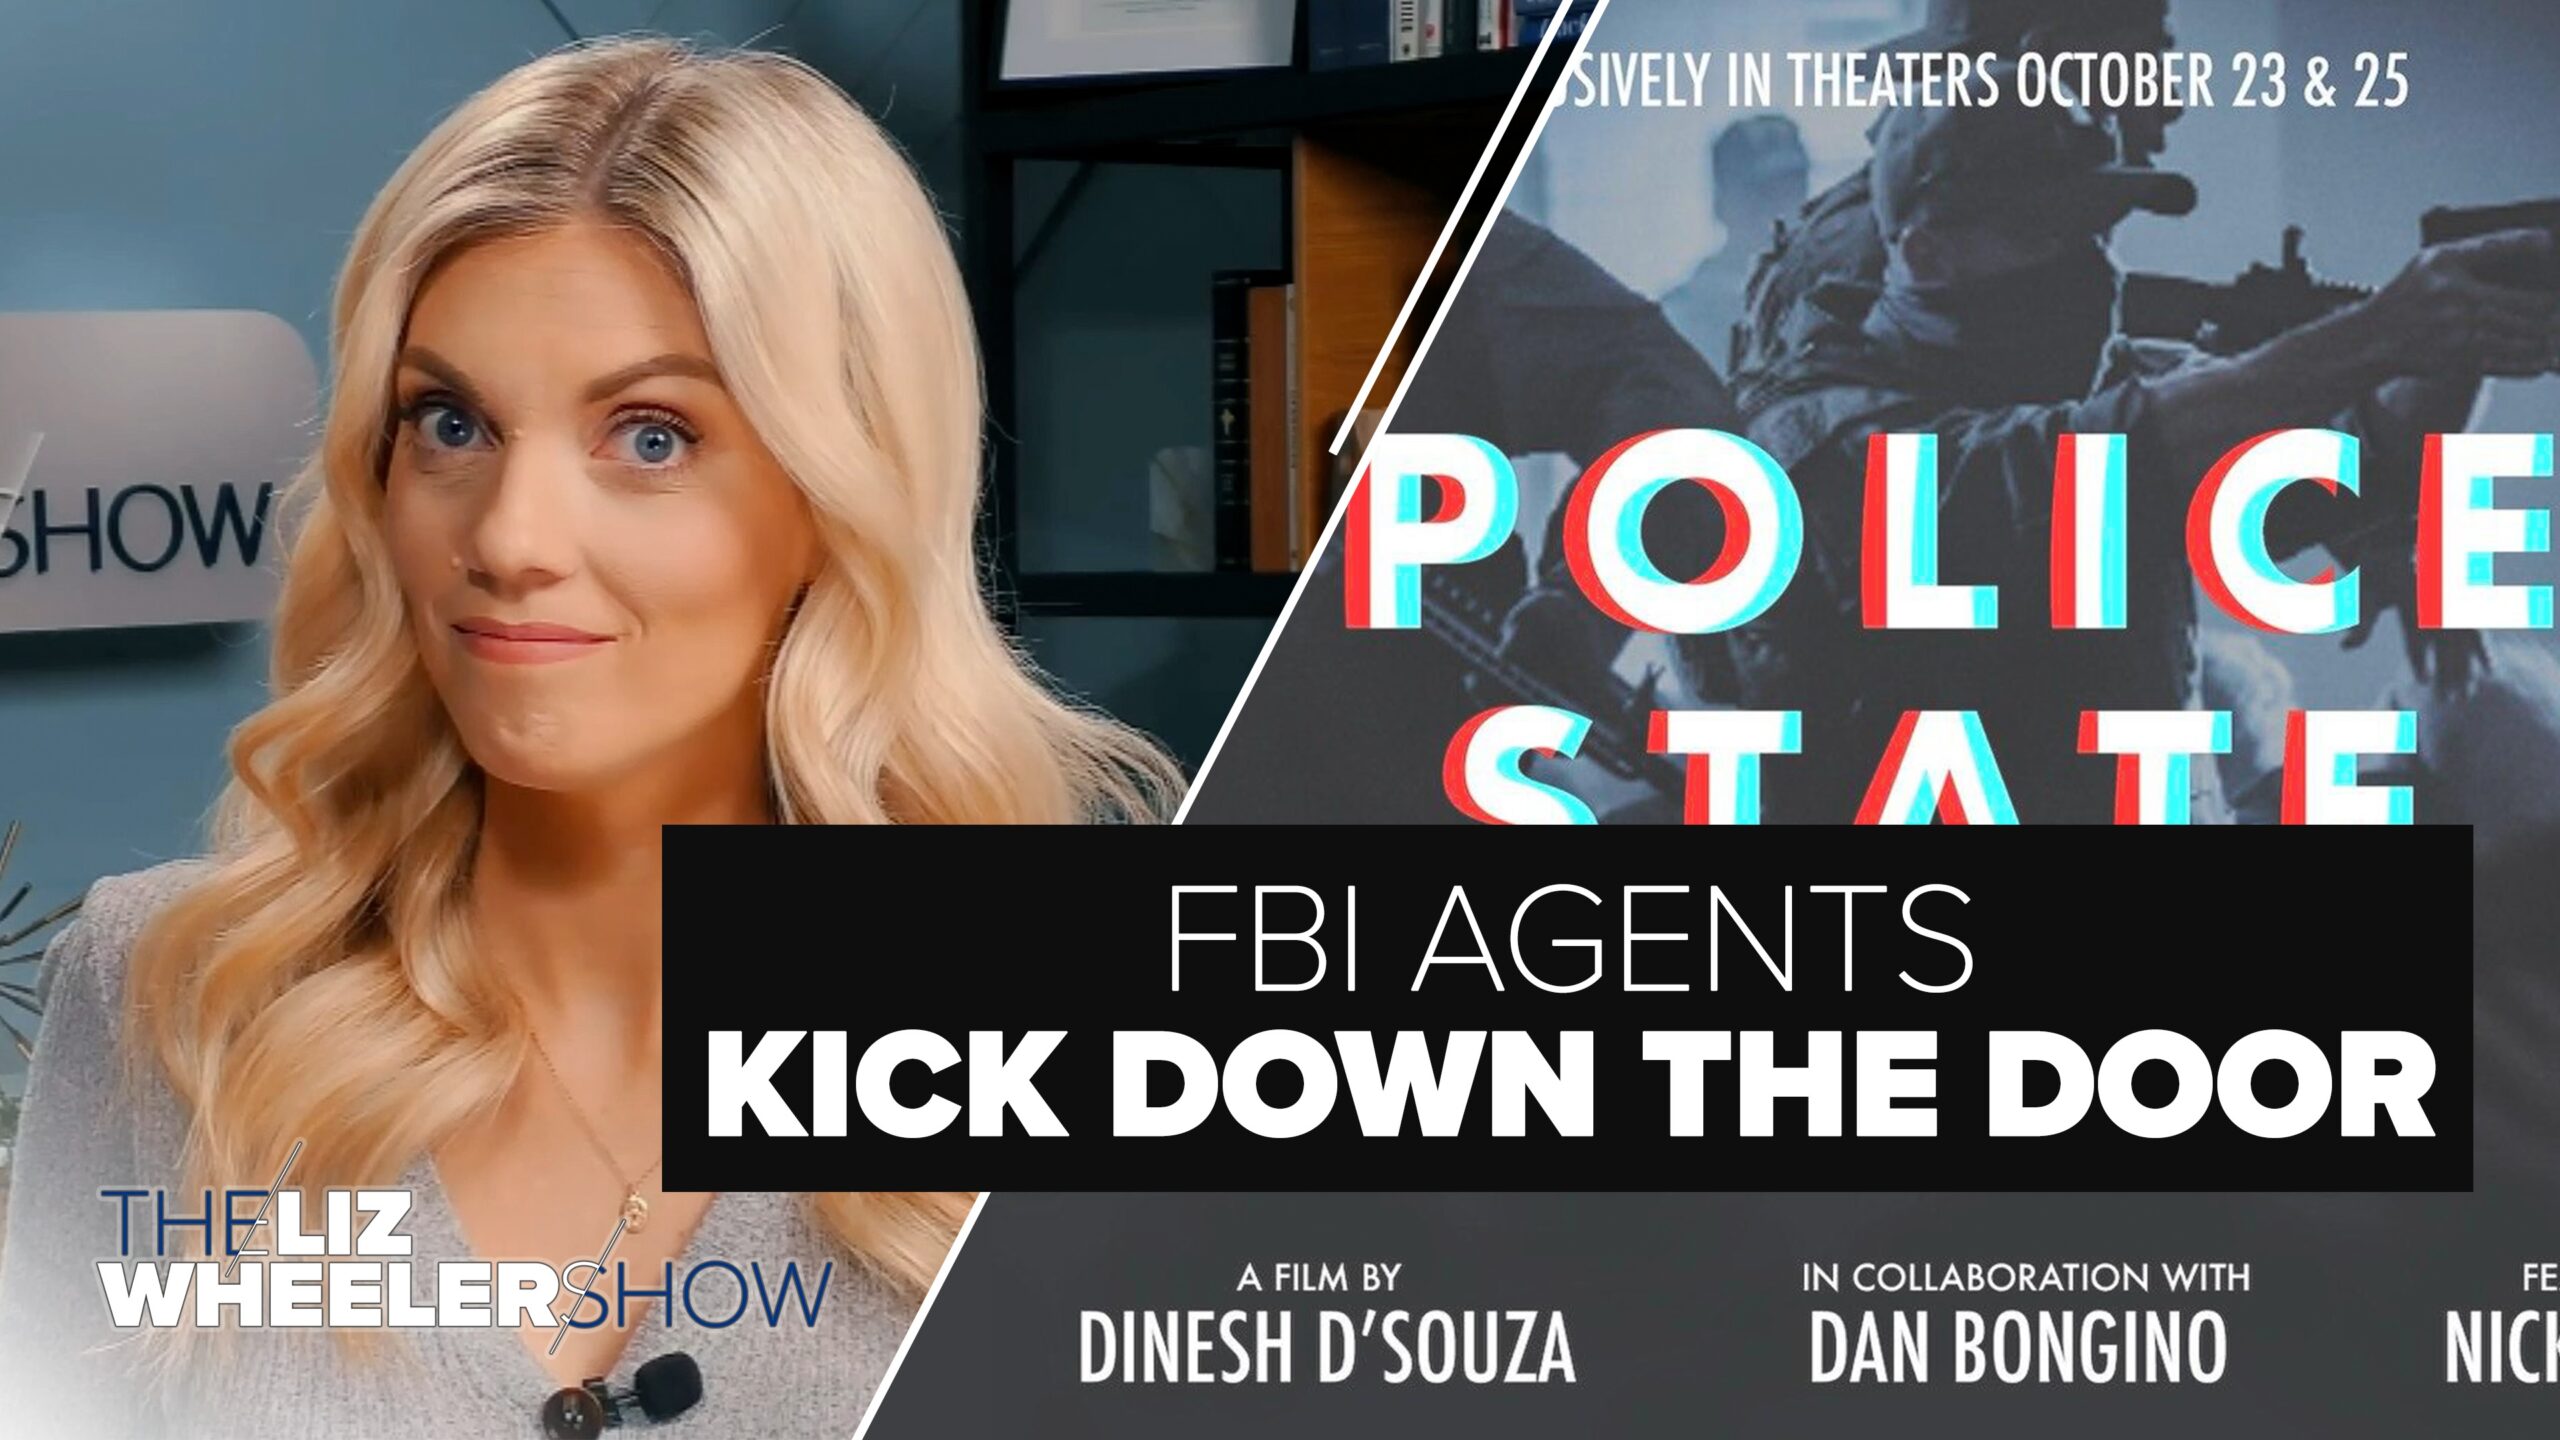 An image of a promotional poster for Dinesh D'Souza's latest movie "Police State" appears on screen.